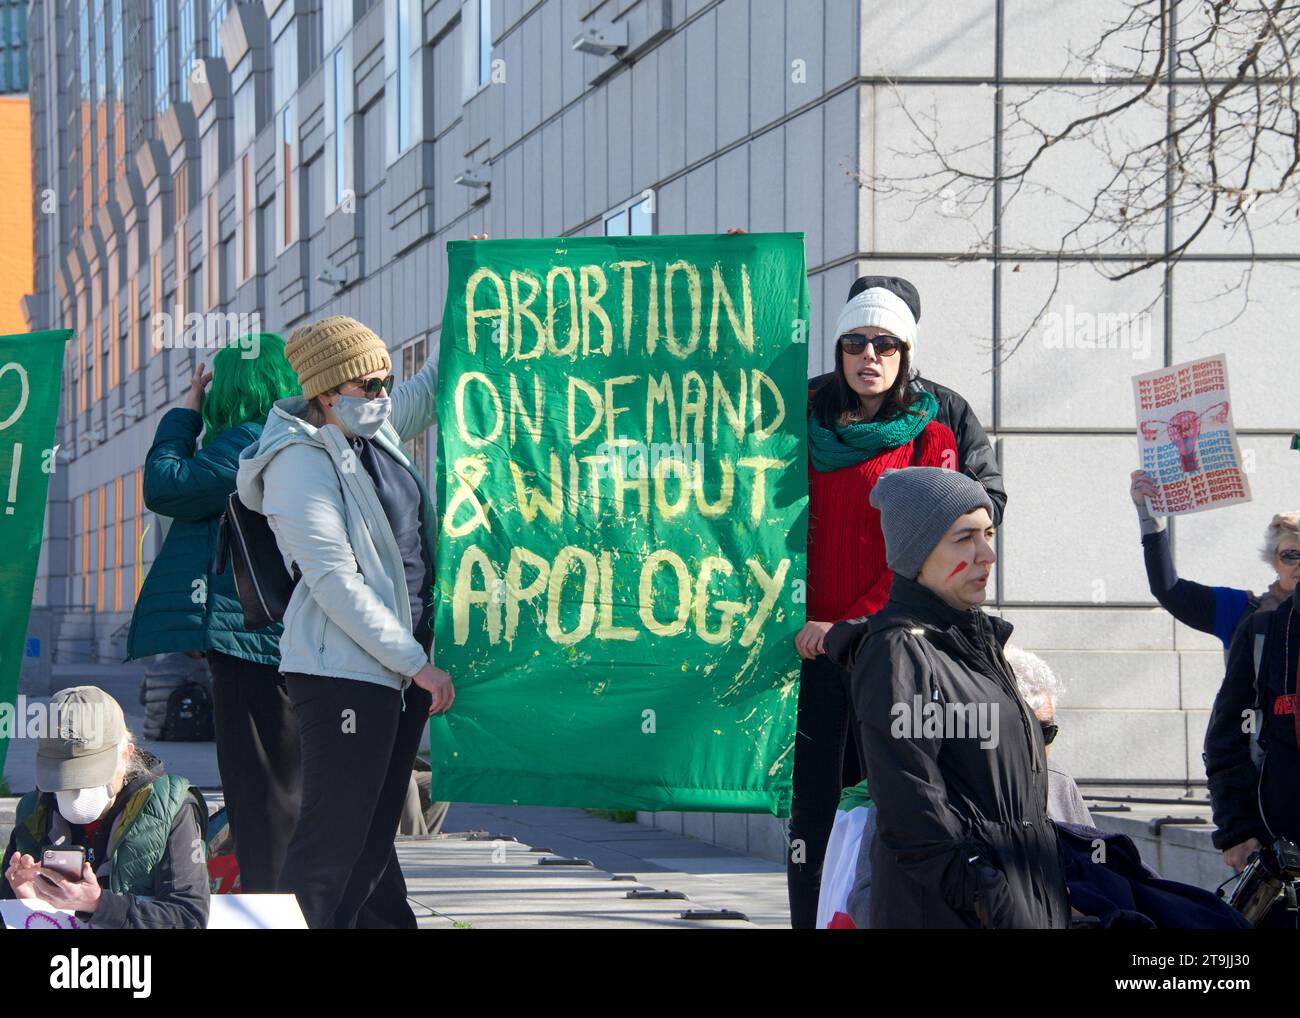 San Francisco, CA - Jan 21, 2023: Unidentified pro-choice counter protestors at the annual March for Life, holding pro-choice signs and banners across Stock Photo